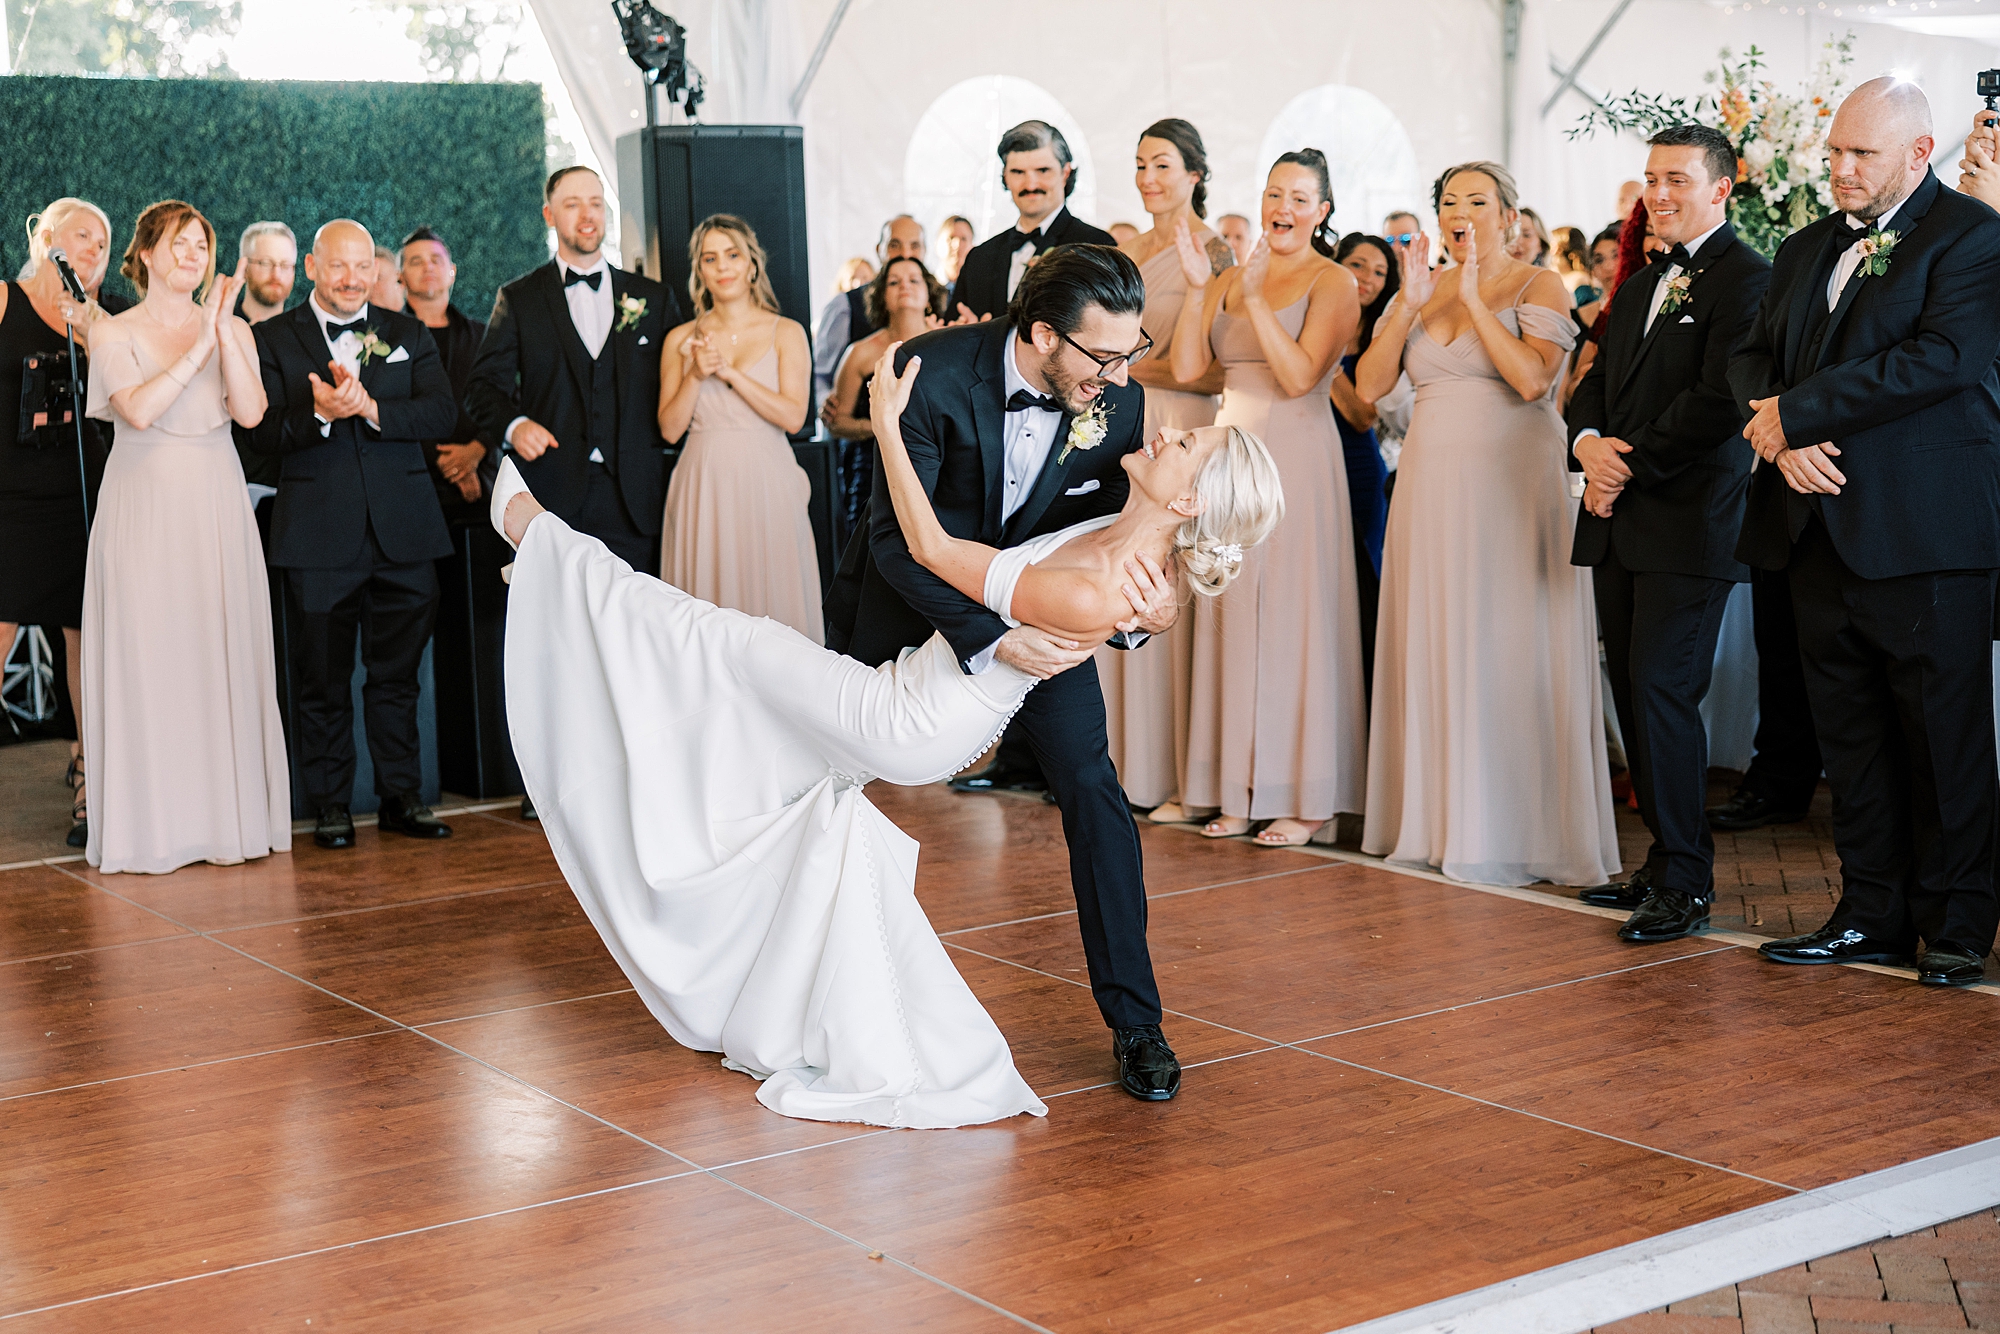 groom dips bride during first dance during wedding reception at Lauxmont Farms